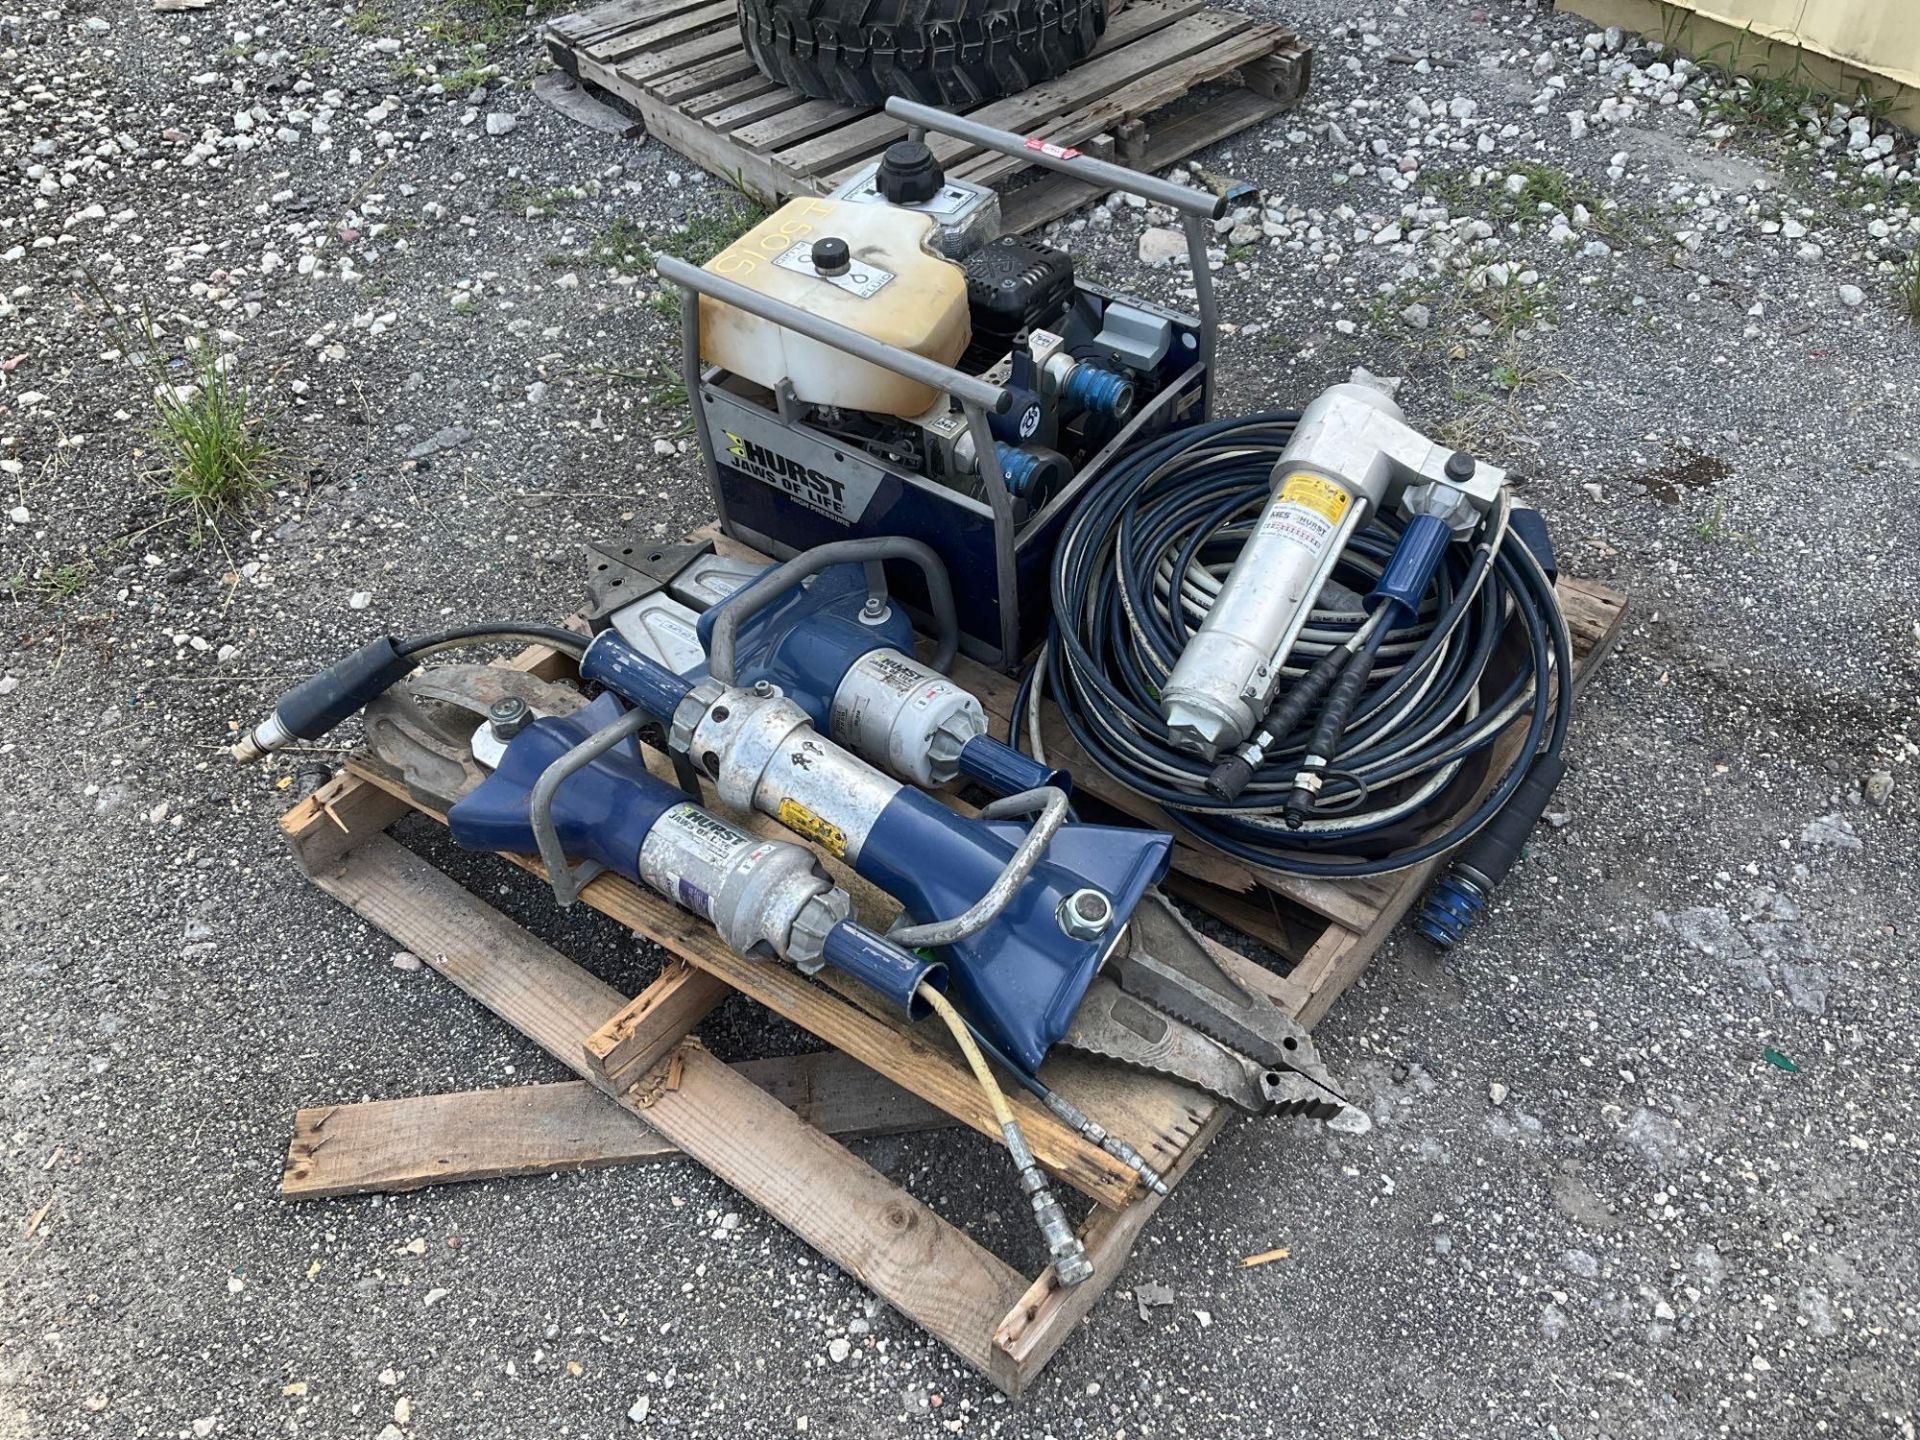 Centaur/ Hurst Jaws of Life and Hydraulic Tools with pump - Image 3 of 8